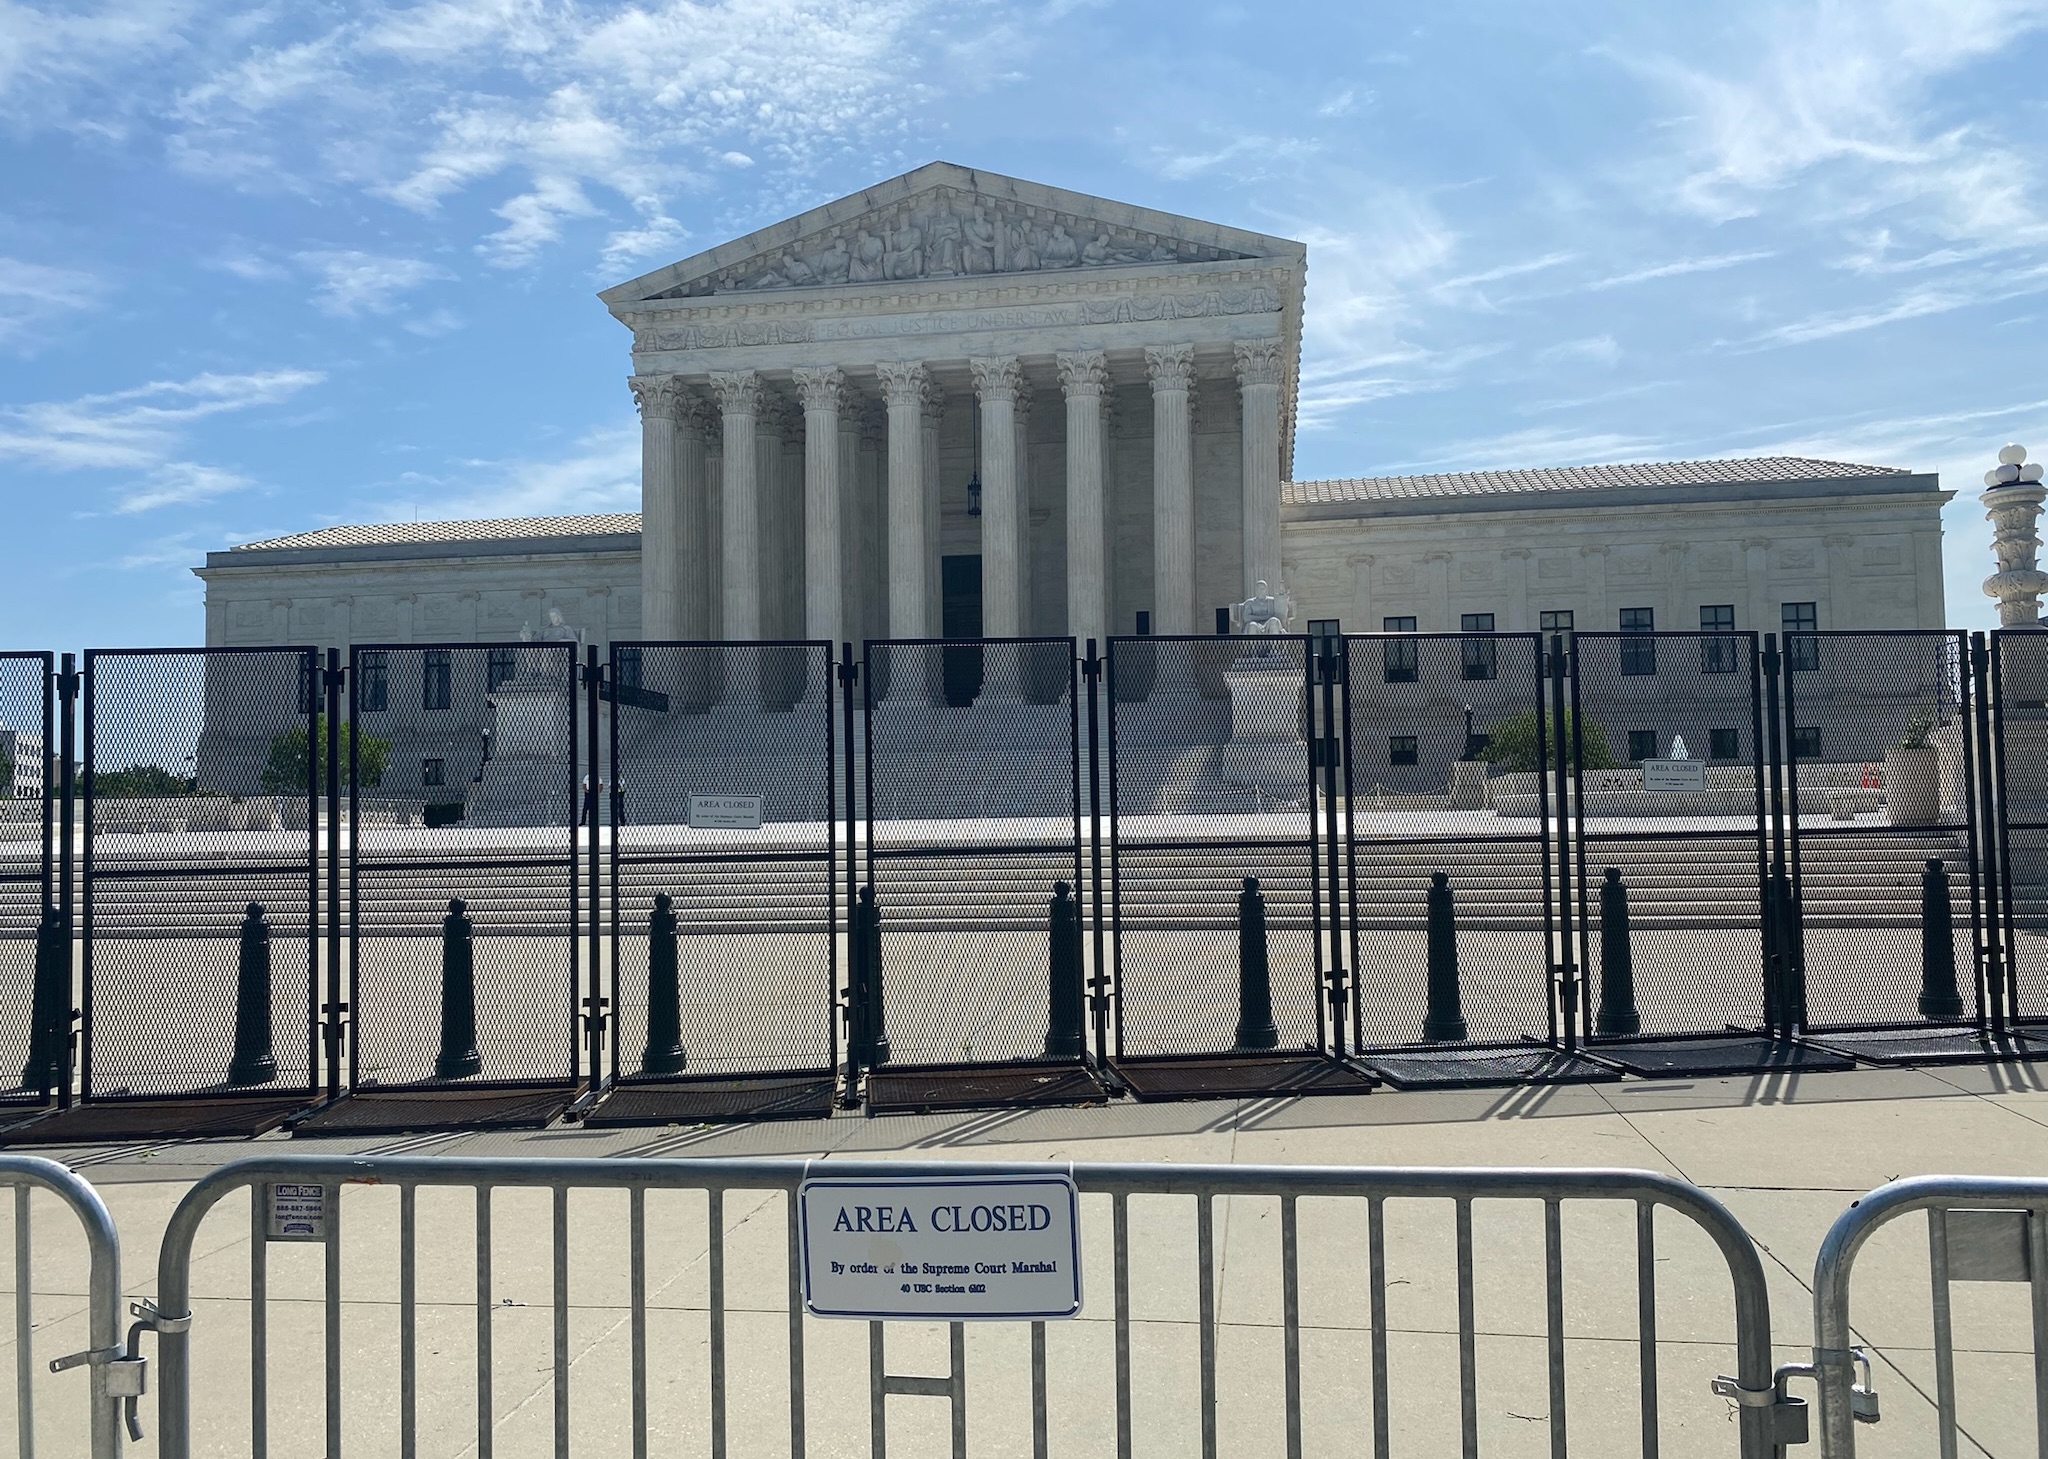 tall black fence and a gate bearing an "area closed" sign stand in front of the supreme court building